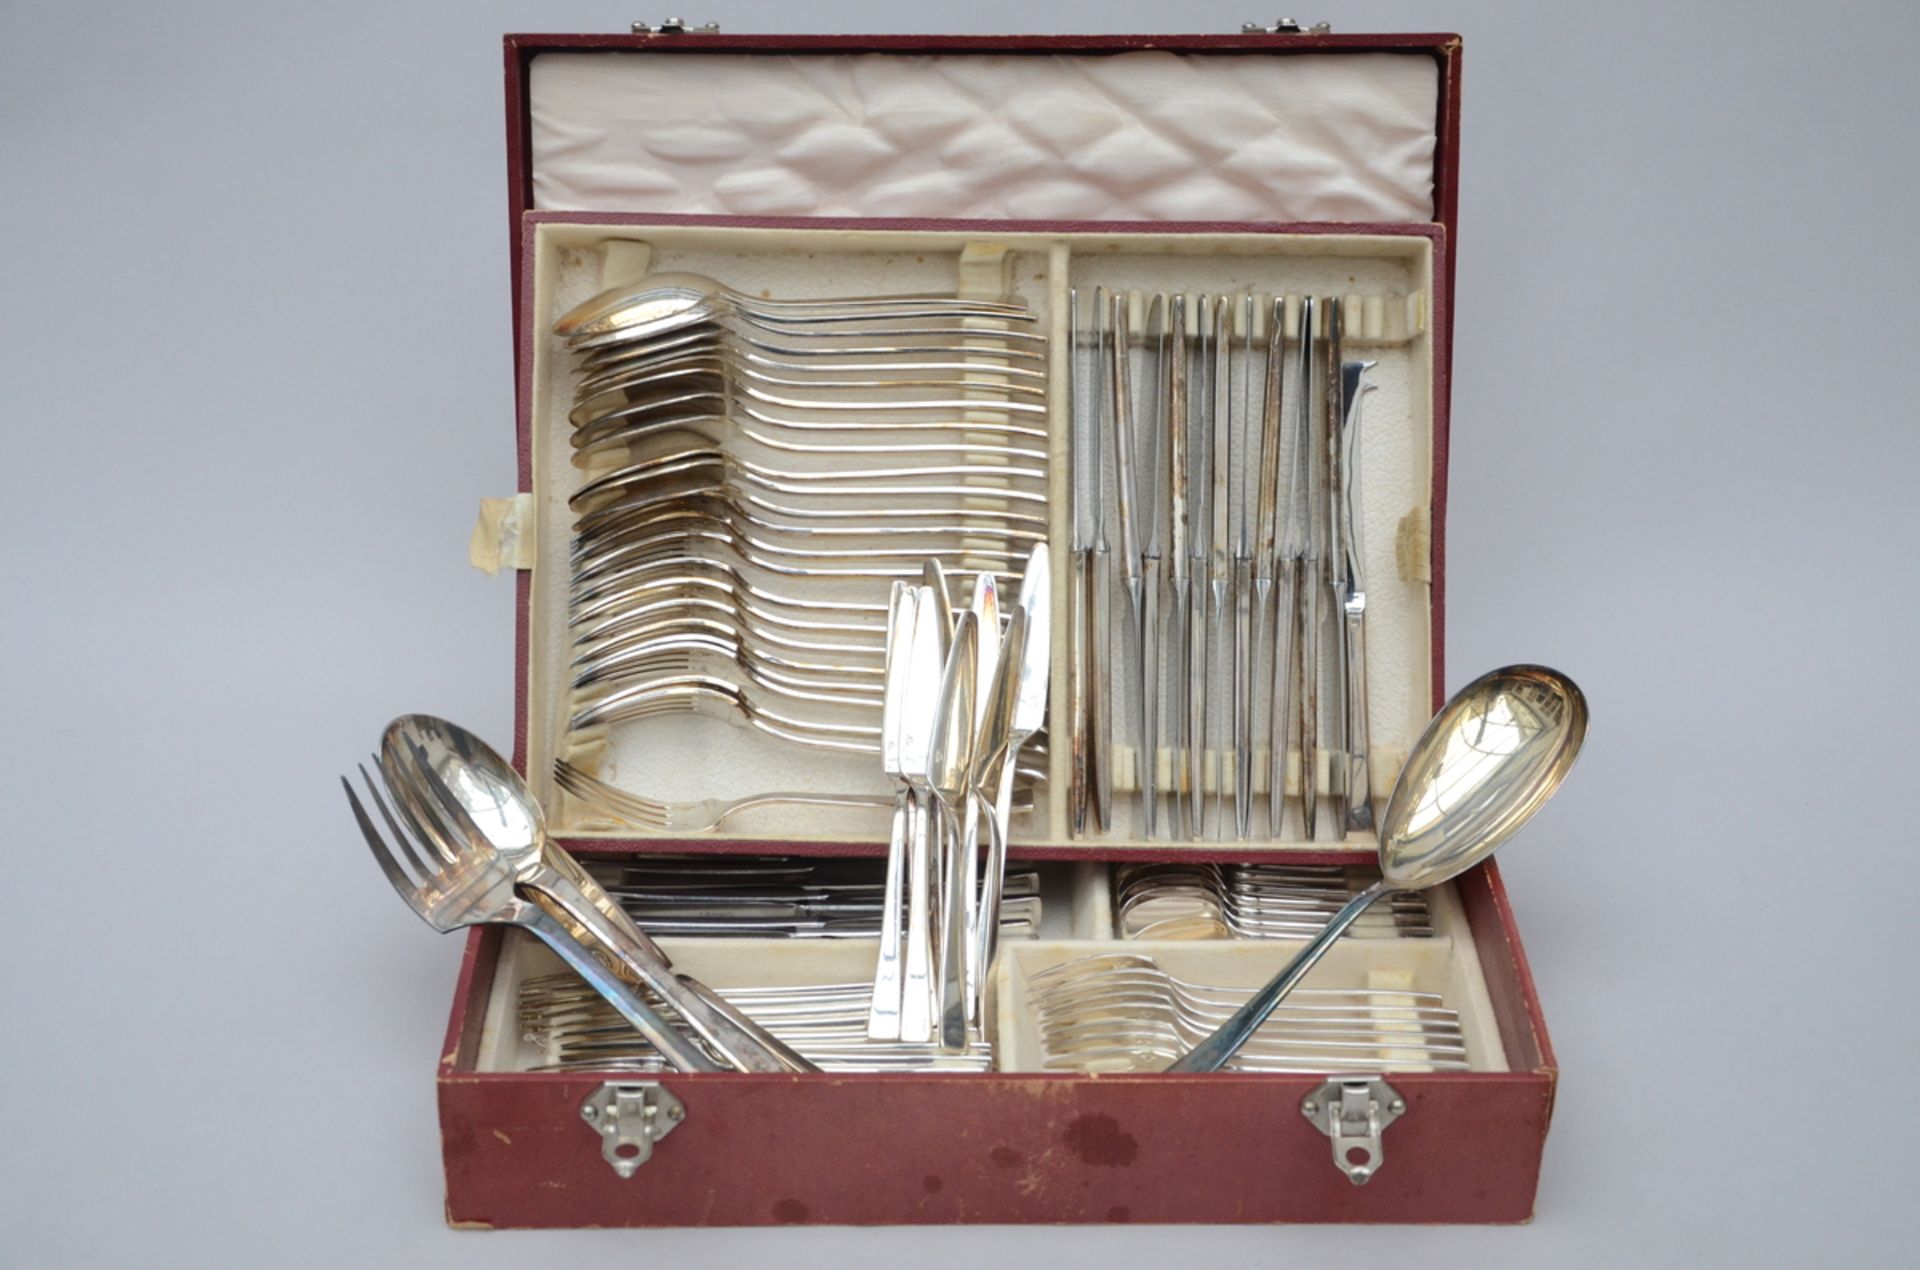 Cutlery set in silver plated metal by Christofle 'model Concorde'